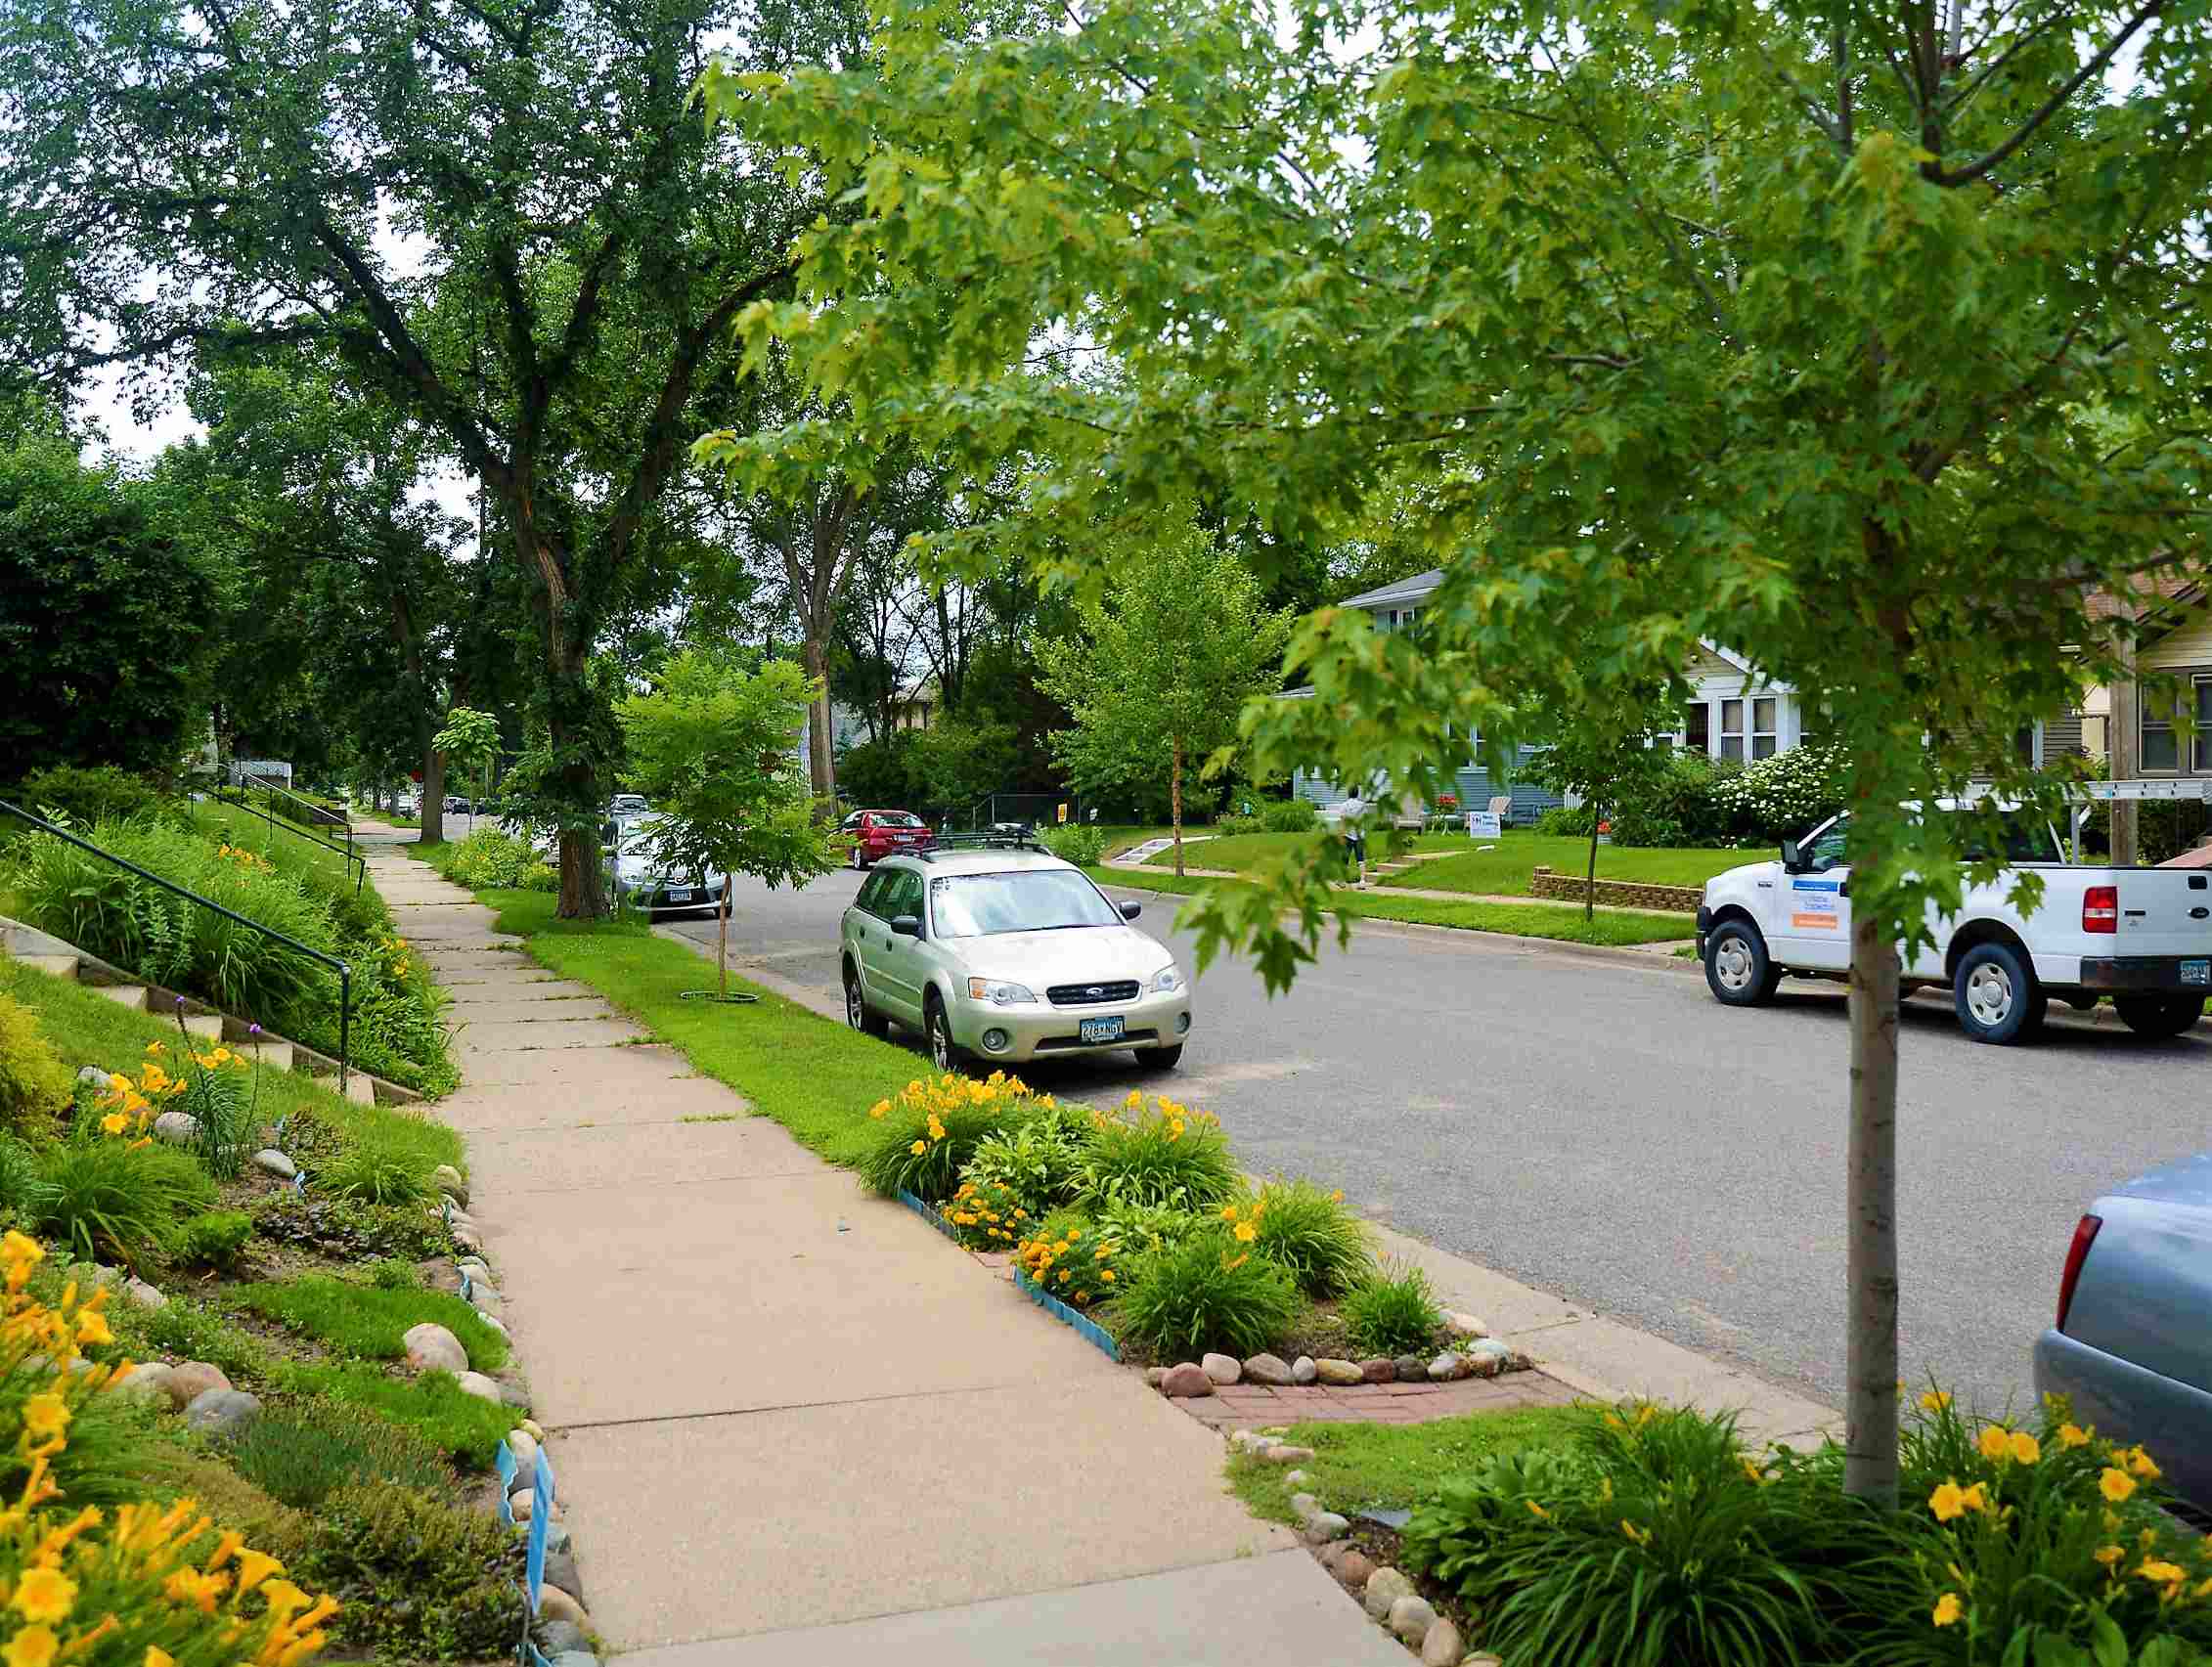 How Does Planting Trees In Urban Areas Improve Air Quality And Reduce Energy Use?